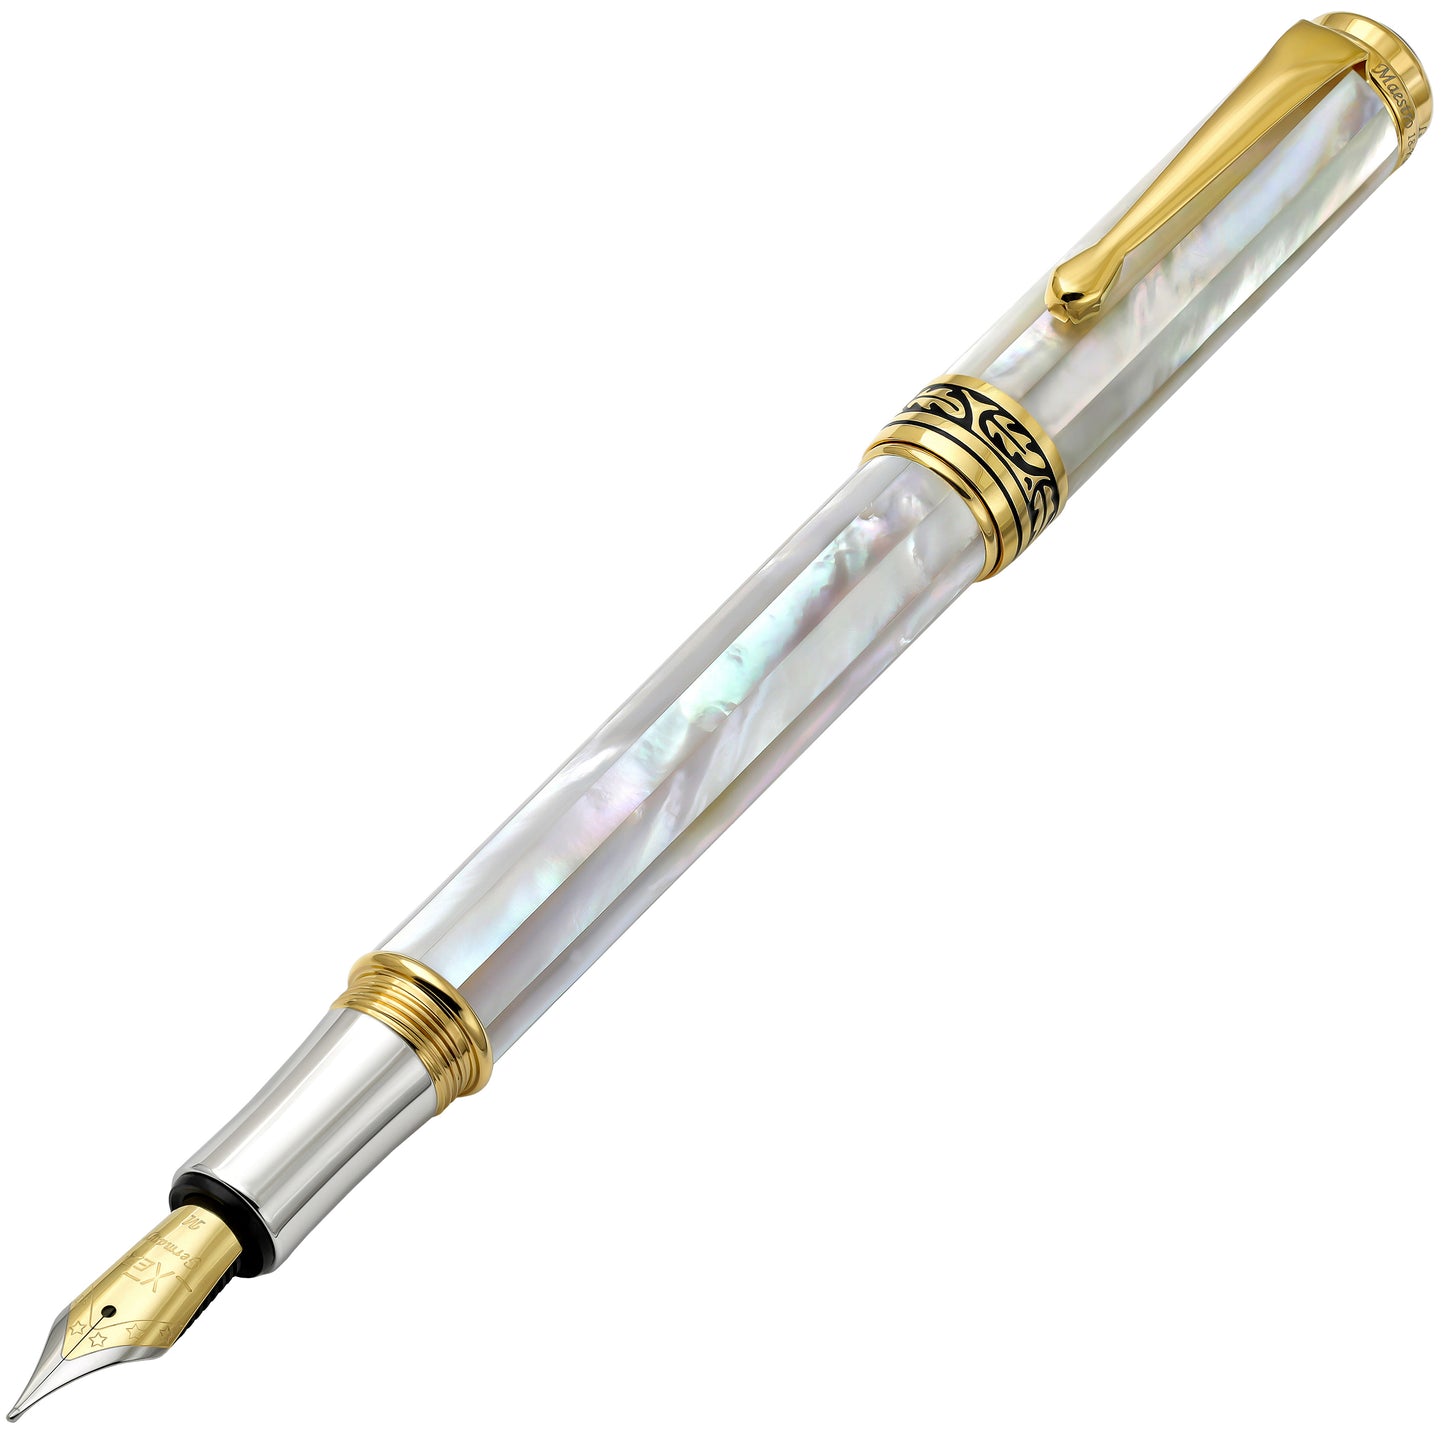 Angled 3D view of the front of the Maestro White MOP FM fountain pen